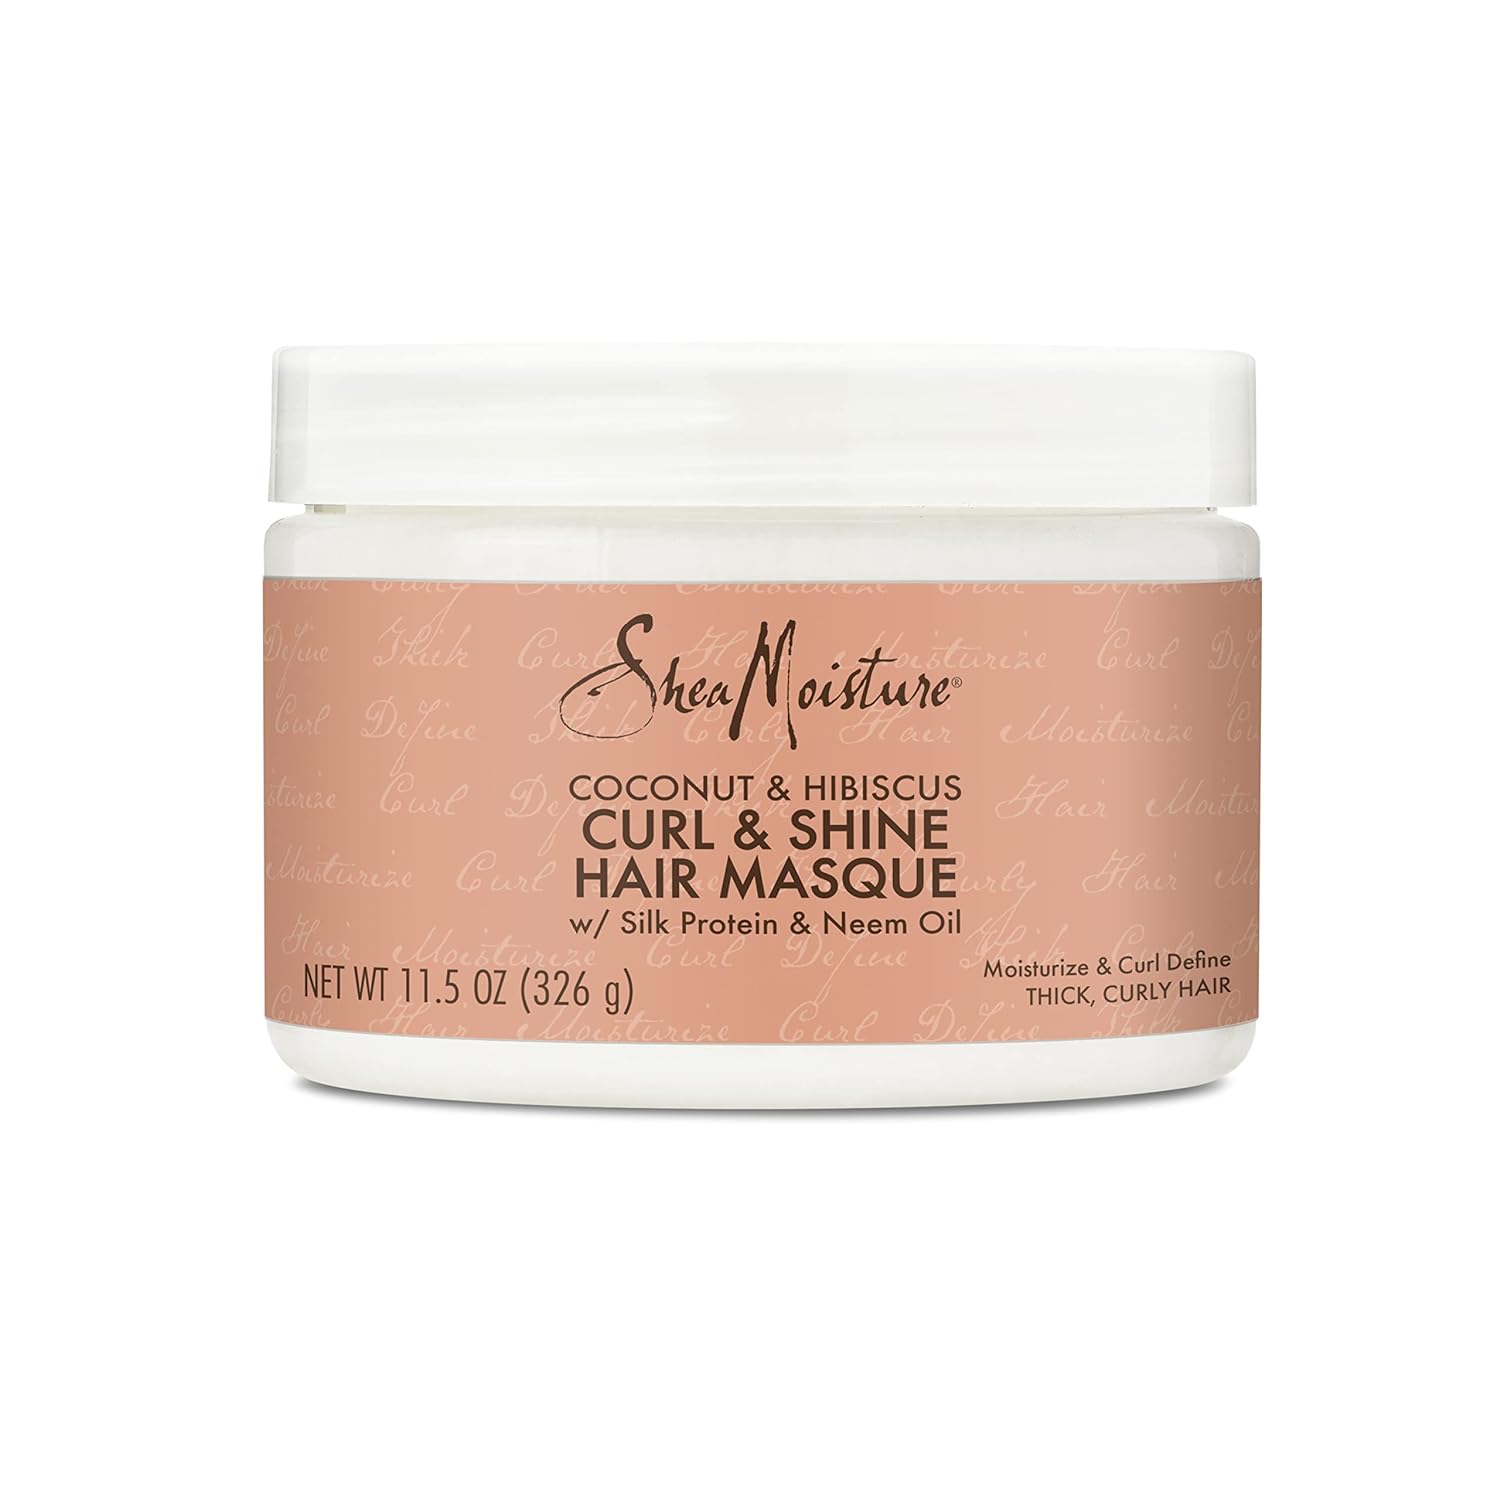 SheaMoisture Hair Mask Coconut & Hibiscus for Dry Curls Hair Mask with Shea Butter 11.5 oz